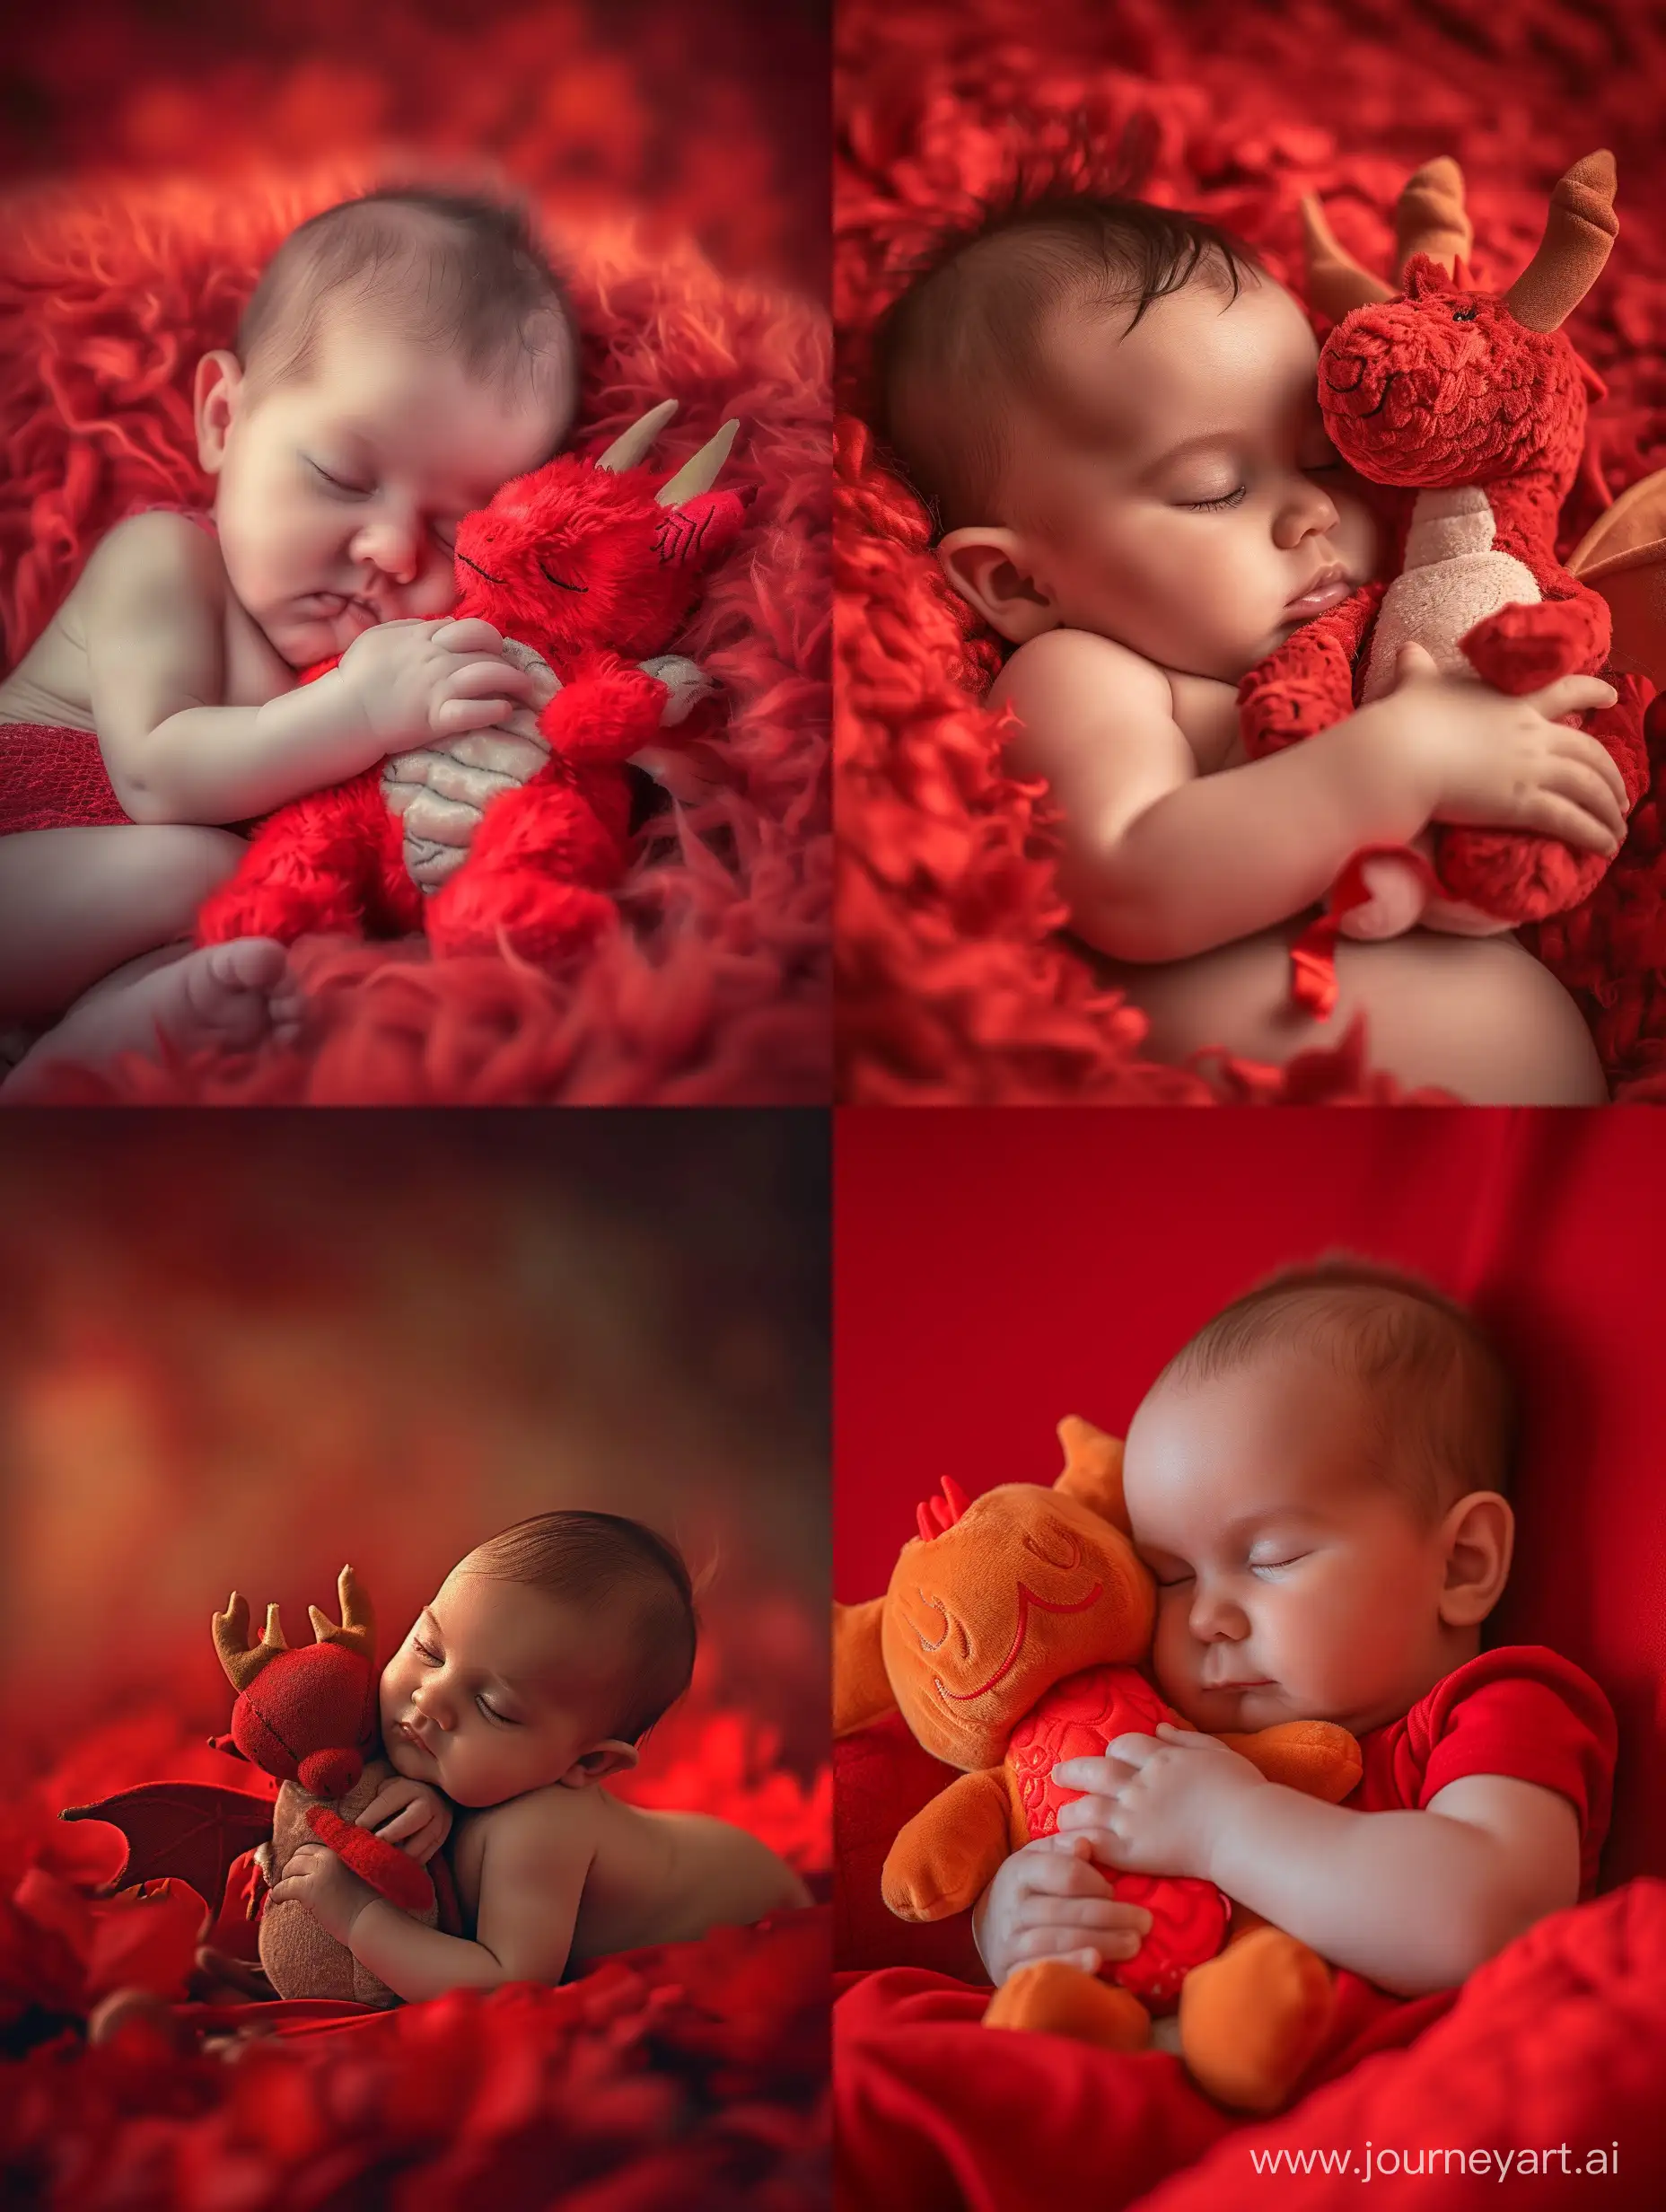 A beautiful scene unfolds as a baby lovingly cradles a dragon plushie while peacefully sleeping. The vibrant red theme adds an adorable and cute touch to this animated, cartoon-like setting. Captured in a portrait style, this image exudes the highest quality of 8k HDR, enhancing its stunning beauty. 